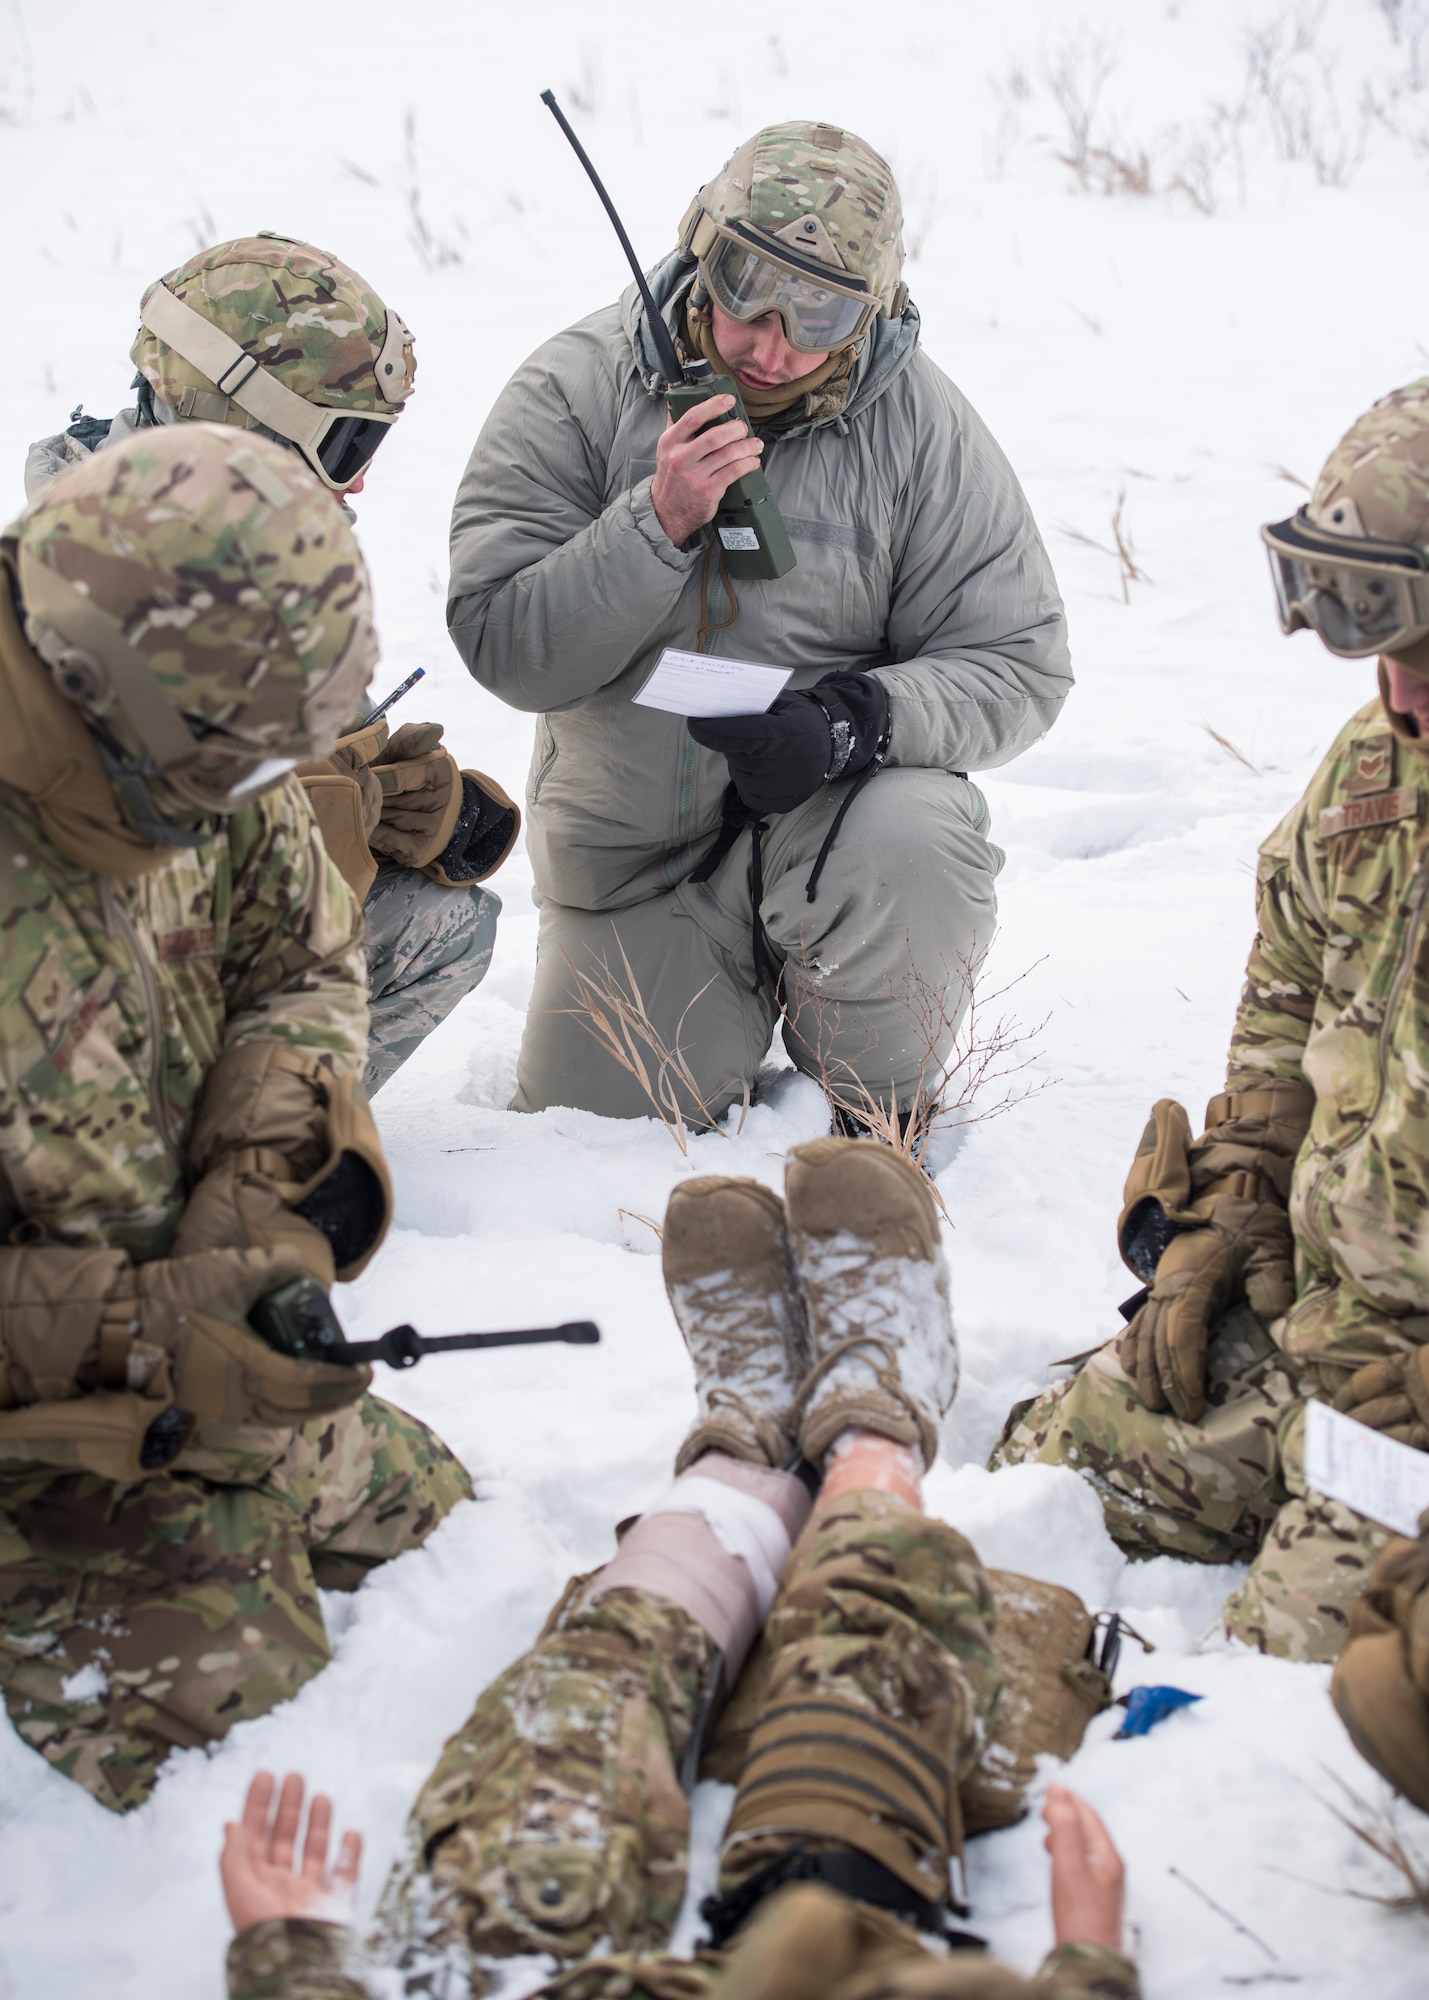 Members of the 91st Security Forces Group perform self-aid buddy care on a simulated casualty in the Turtle Mountain State Forest, N.D., Feb. 14, 2018. After stabilizing the casualty, defenders vectored in a rescue helicopter for an emergency medical evacuation. (U.S. Air Force photo by Senior Airman J.T. Armstrong)